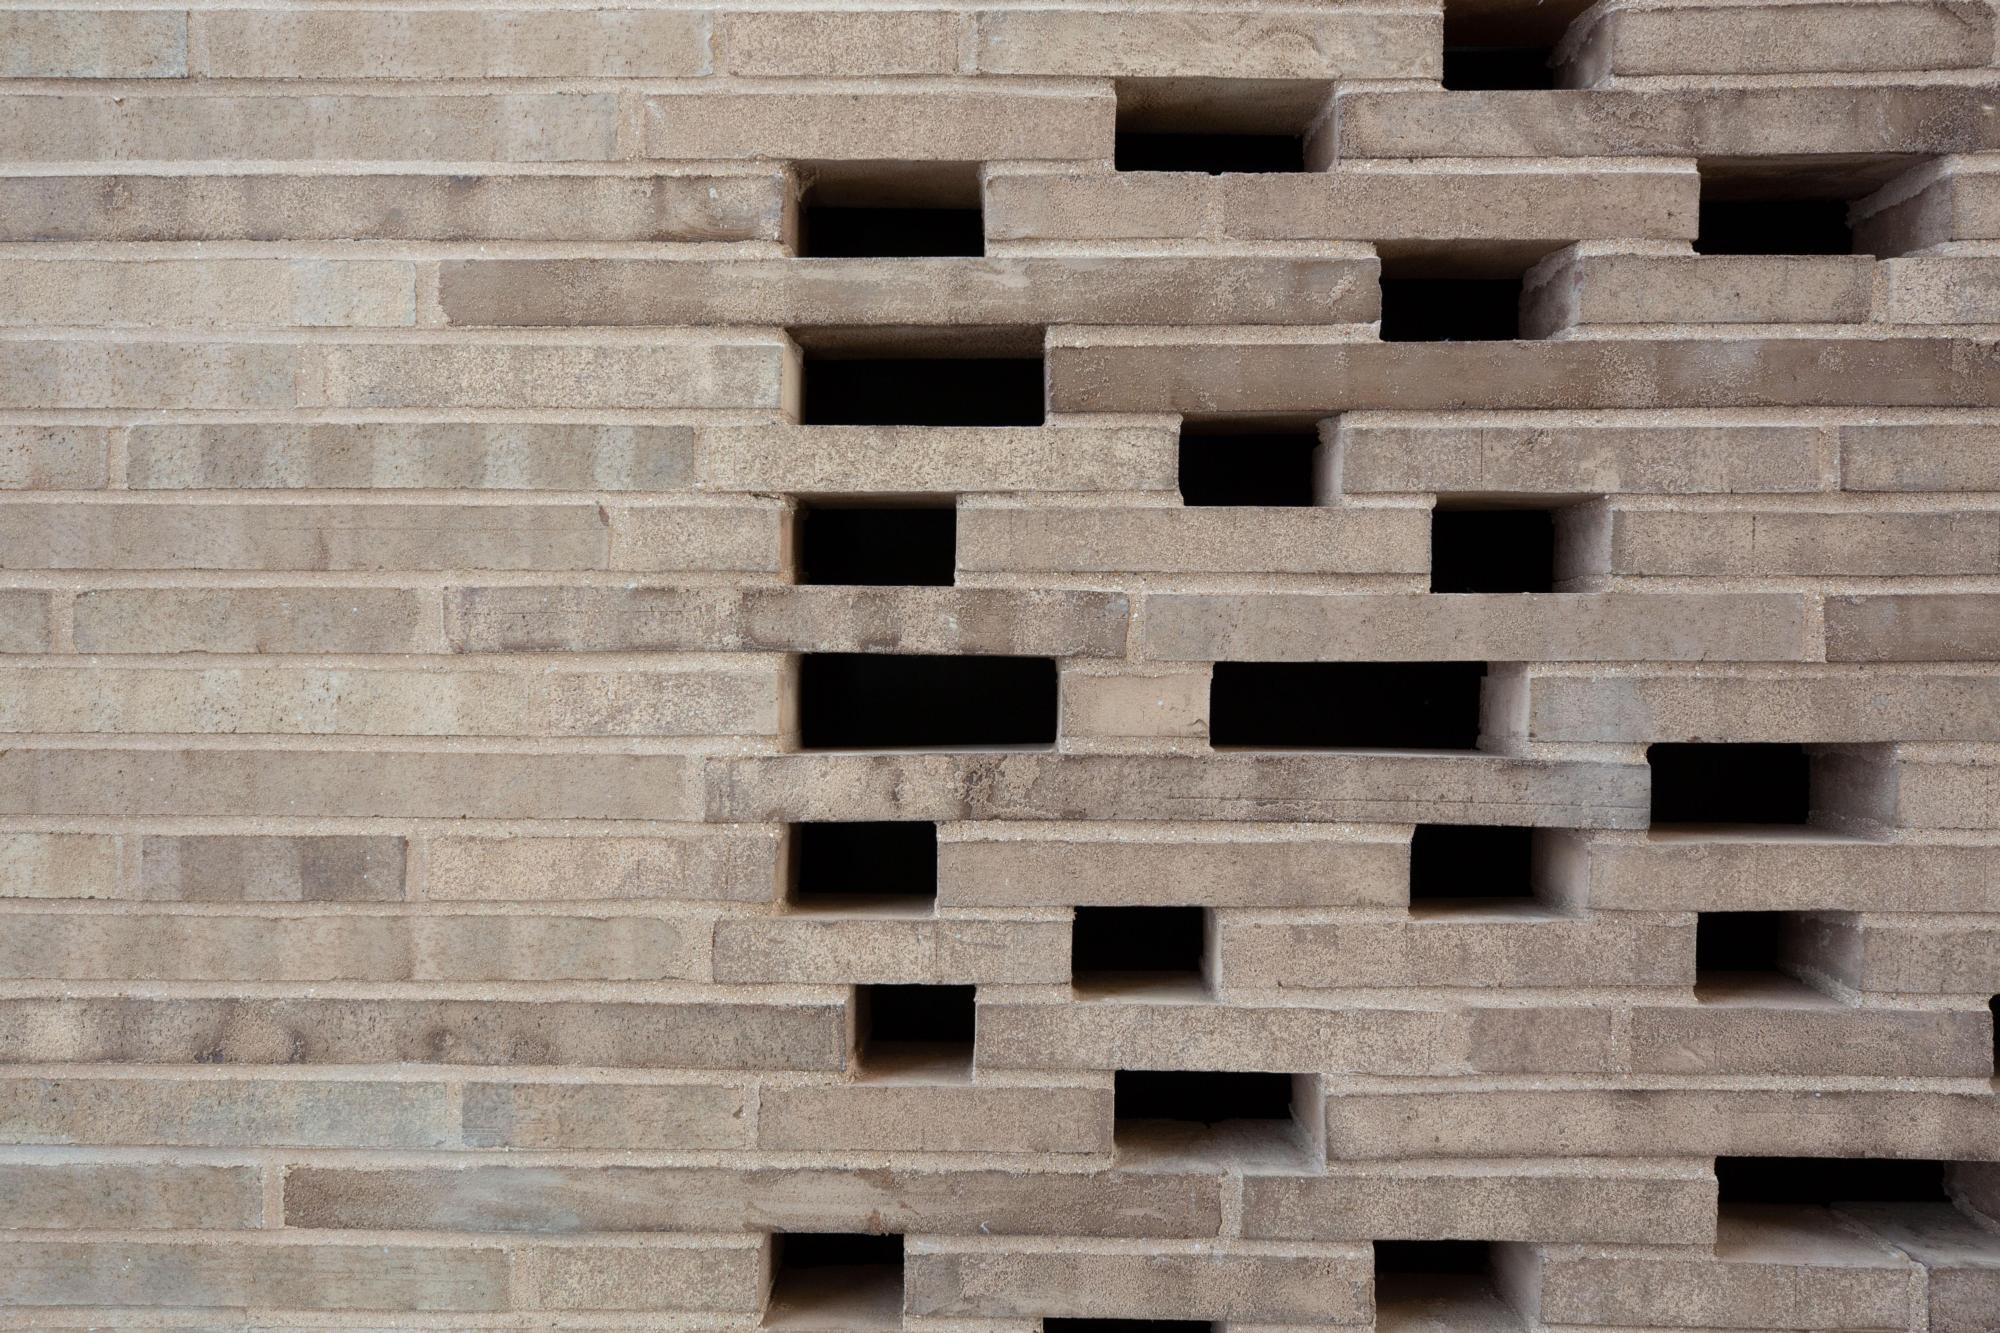 Image of the textured, lightly colored brick of the outer wall of the 175 West 10th Street House